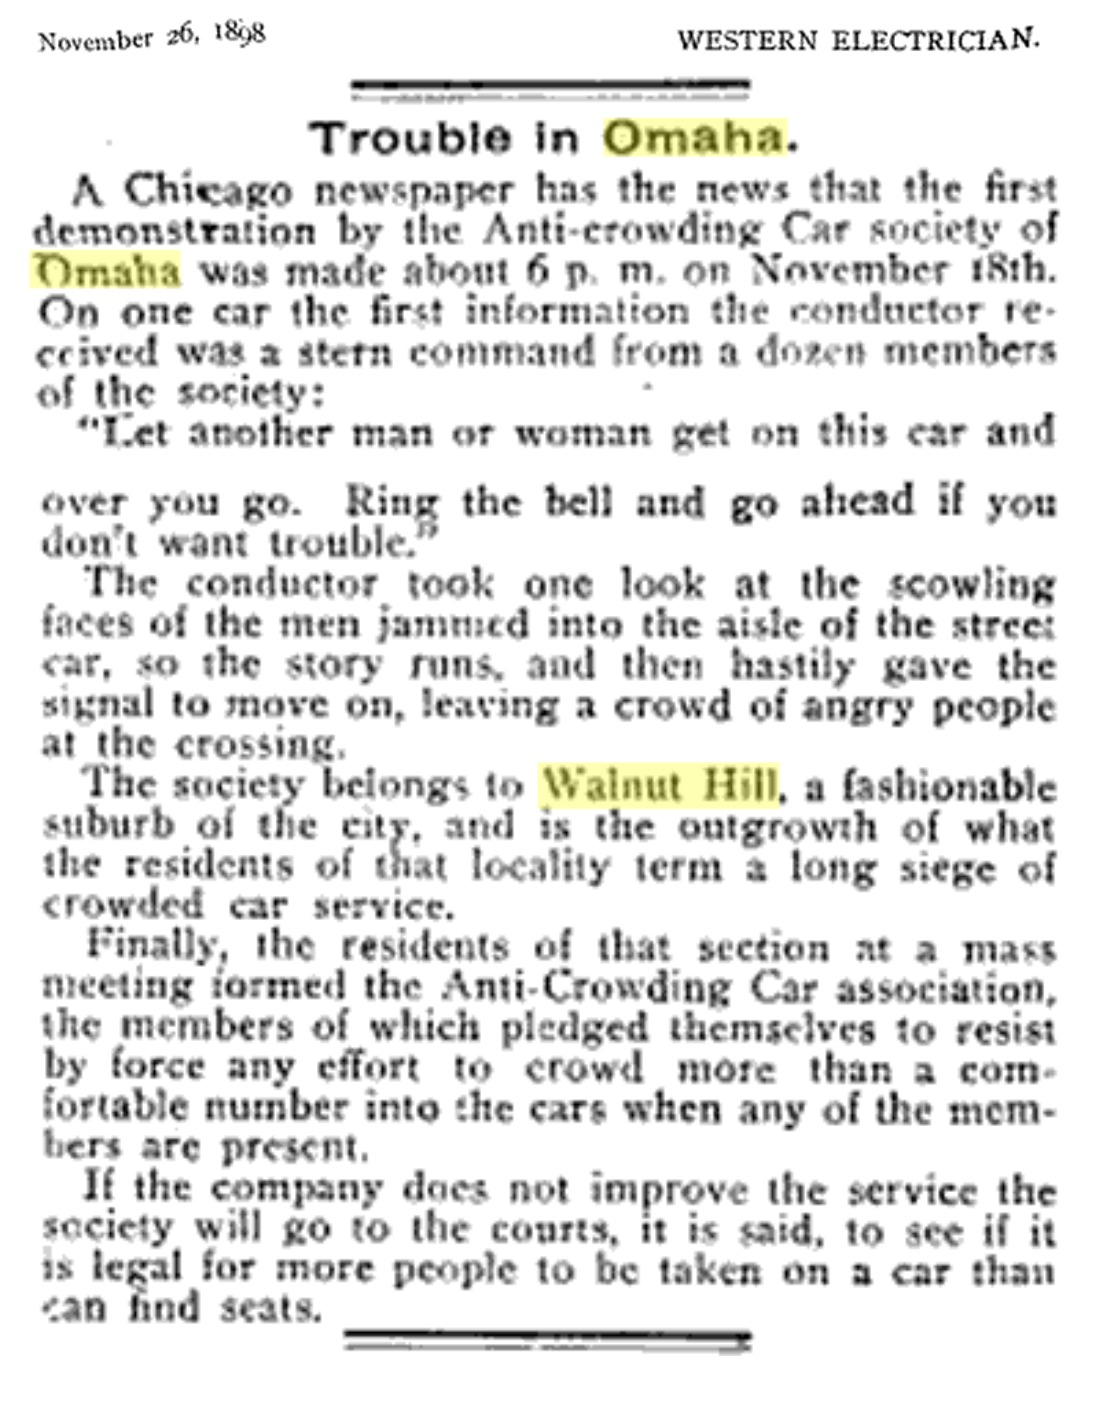 An excerpt from the Western Electrician Journal in 1898 detailing the Anti-Crowding Car Society protests in the Gold Coast neighborhood.